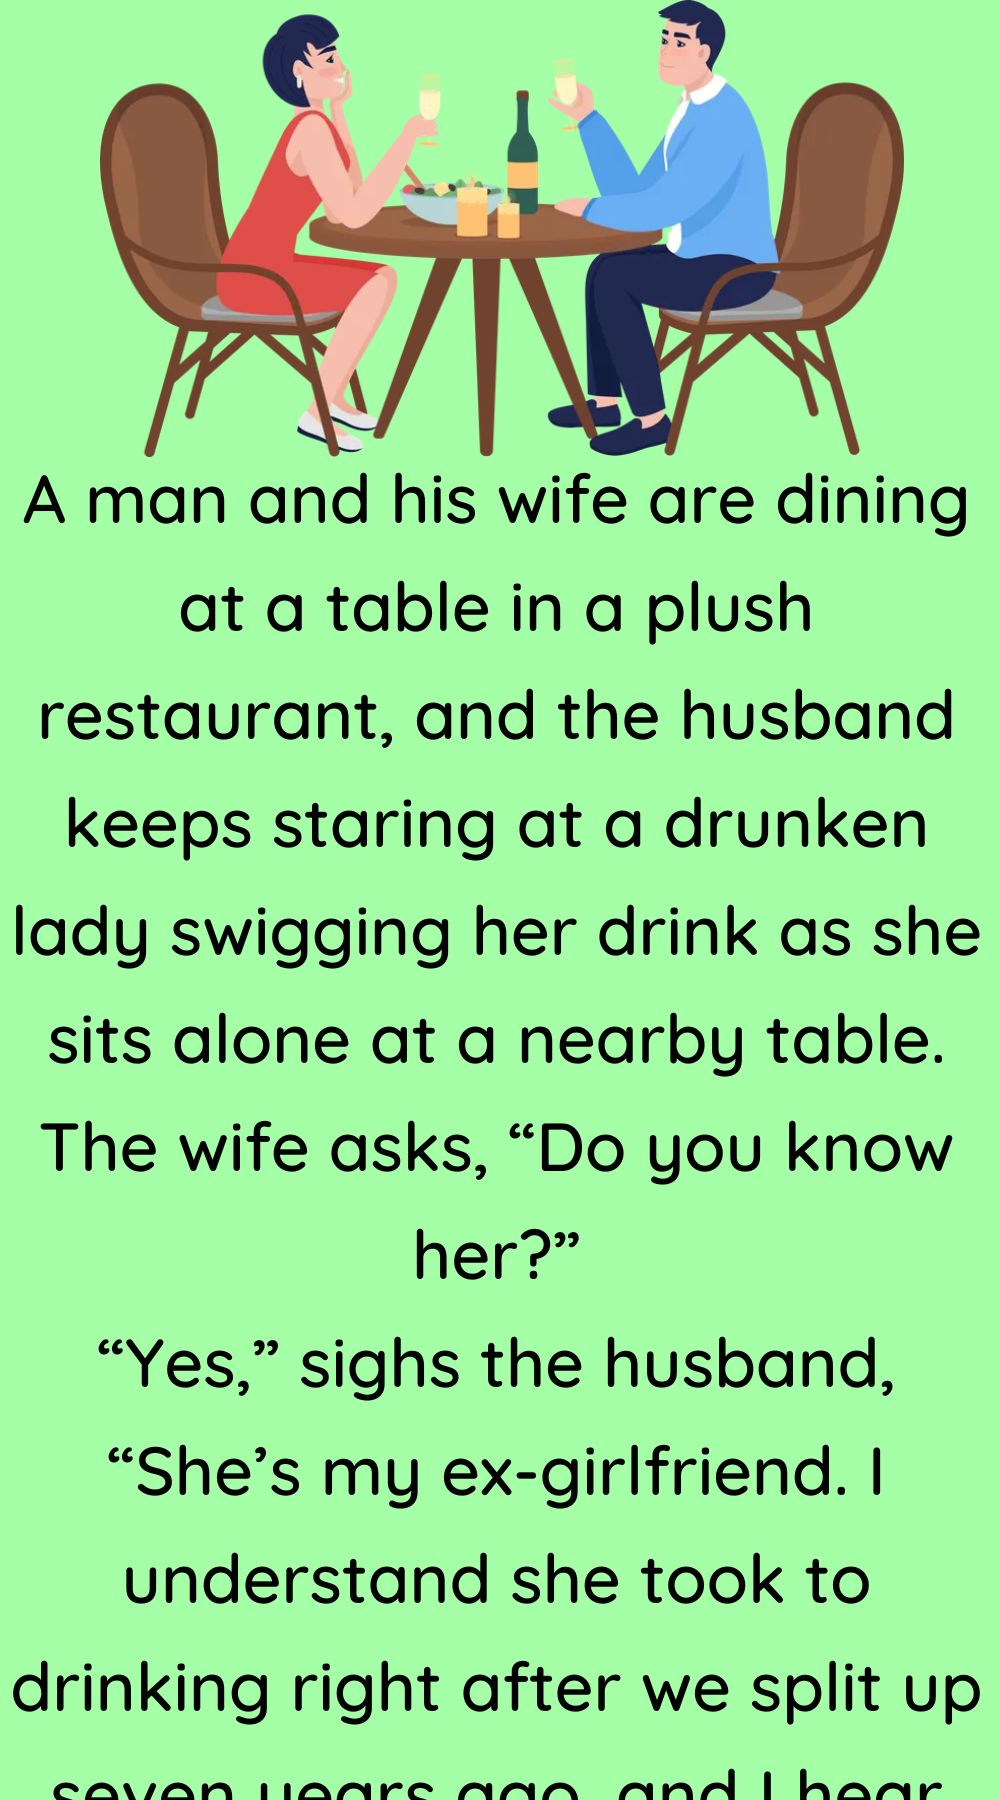 A man and his wife are dining at a table